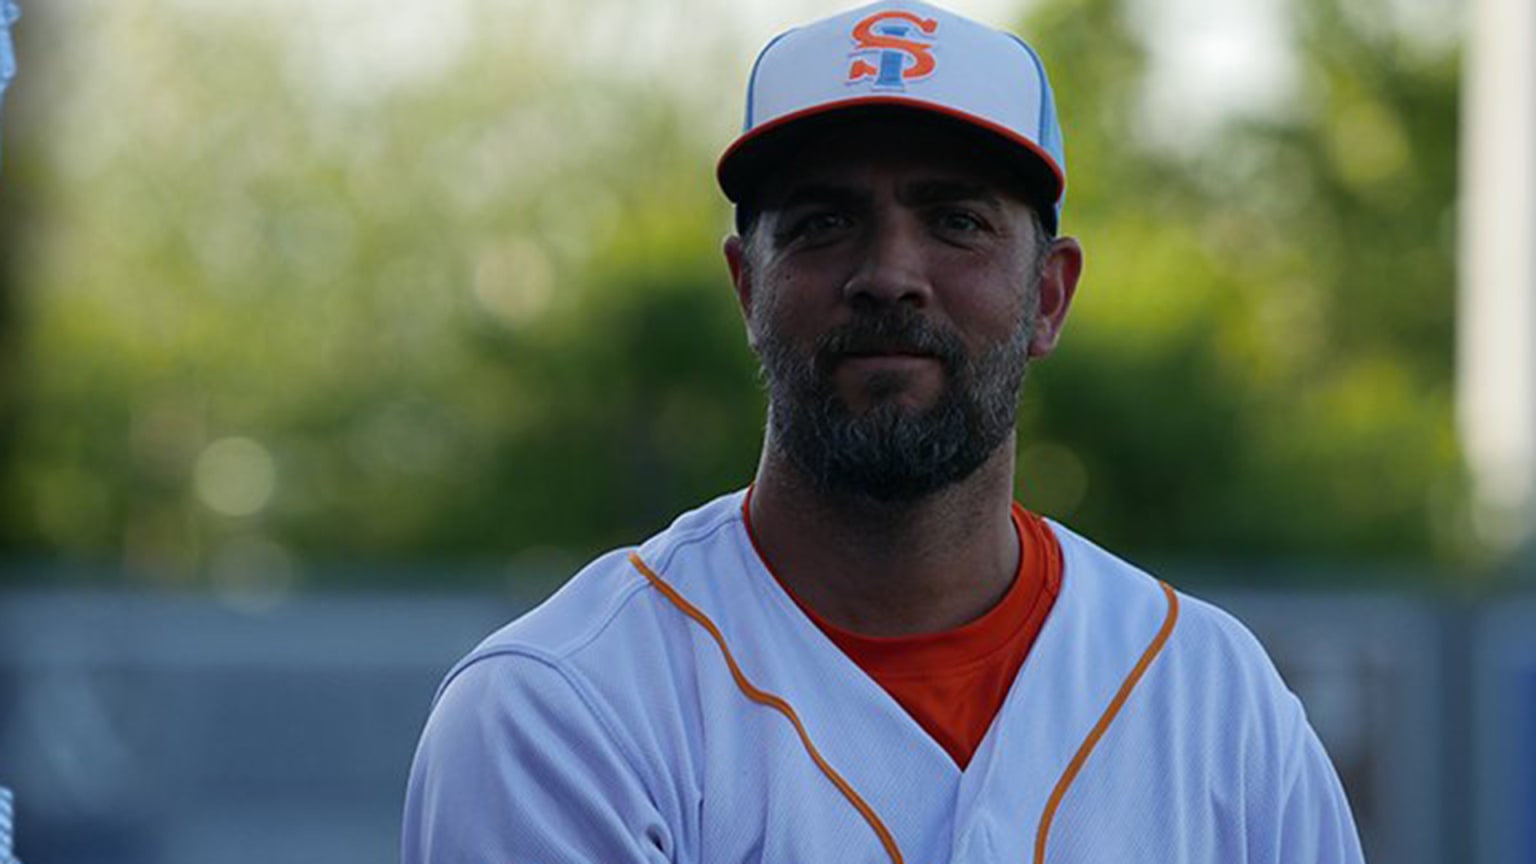 Nelson Figueroa, his beard flecked with gray hairs, before the game in his Staten Island FerryHawks uniform